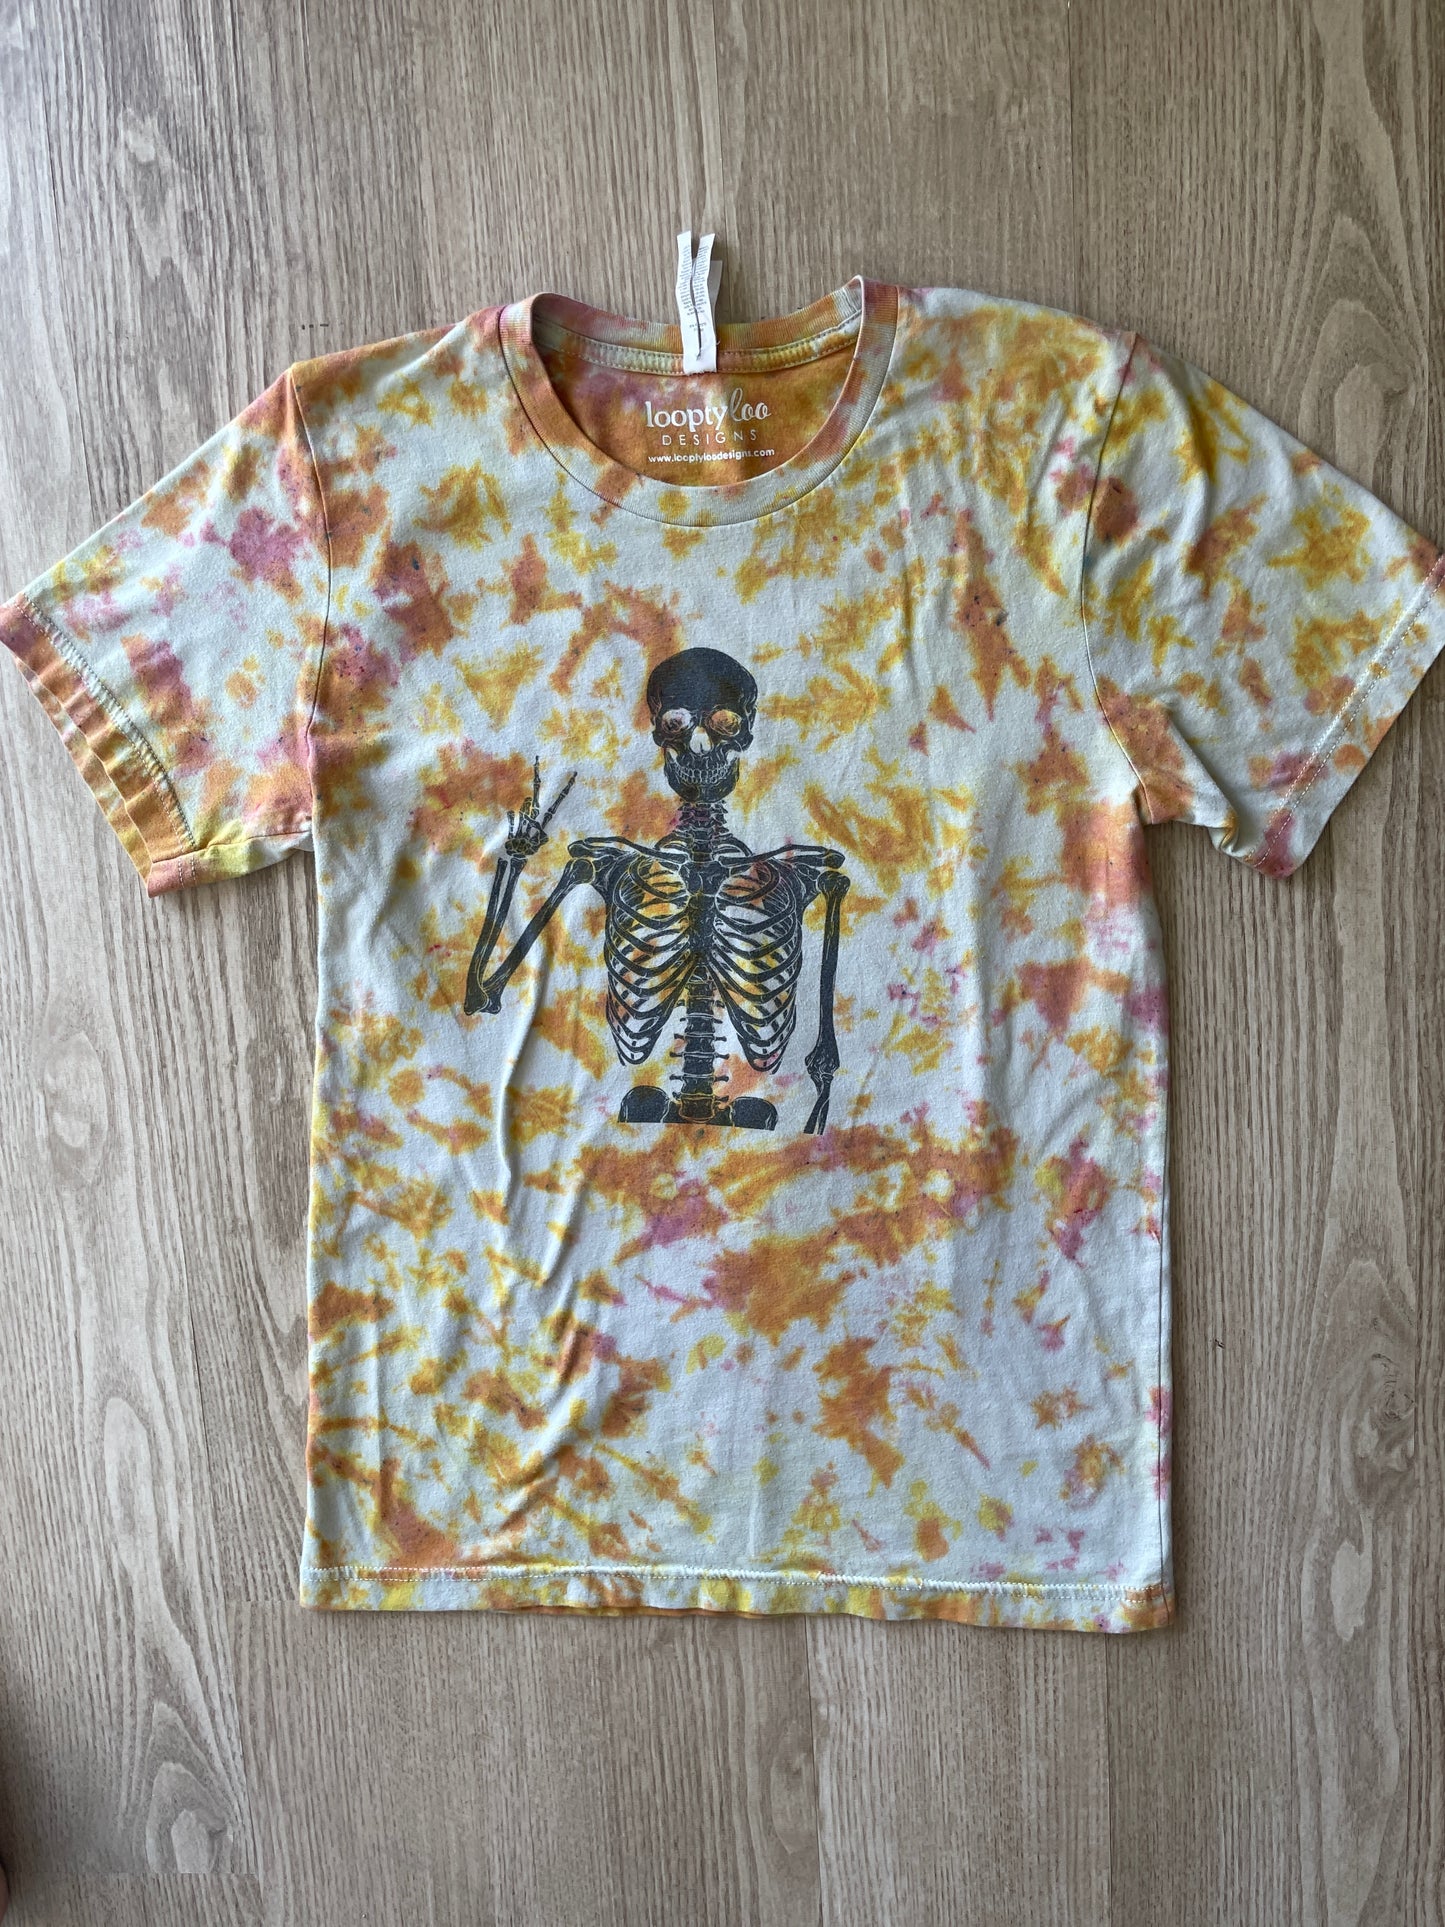 SMALL Men’s Groovy Skeleton Handmade Tie Dye T-Shirt | One-Of-a-Kind Pastel Pink and Orange Short Sleeve